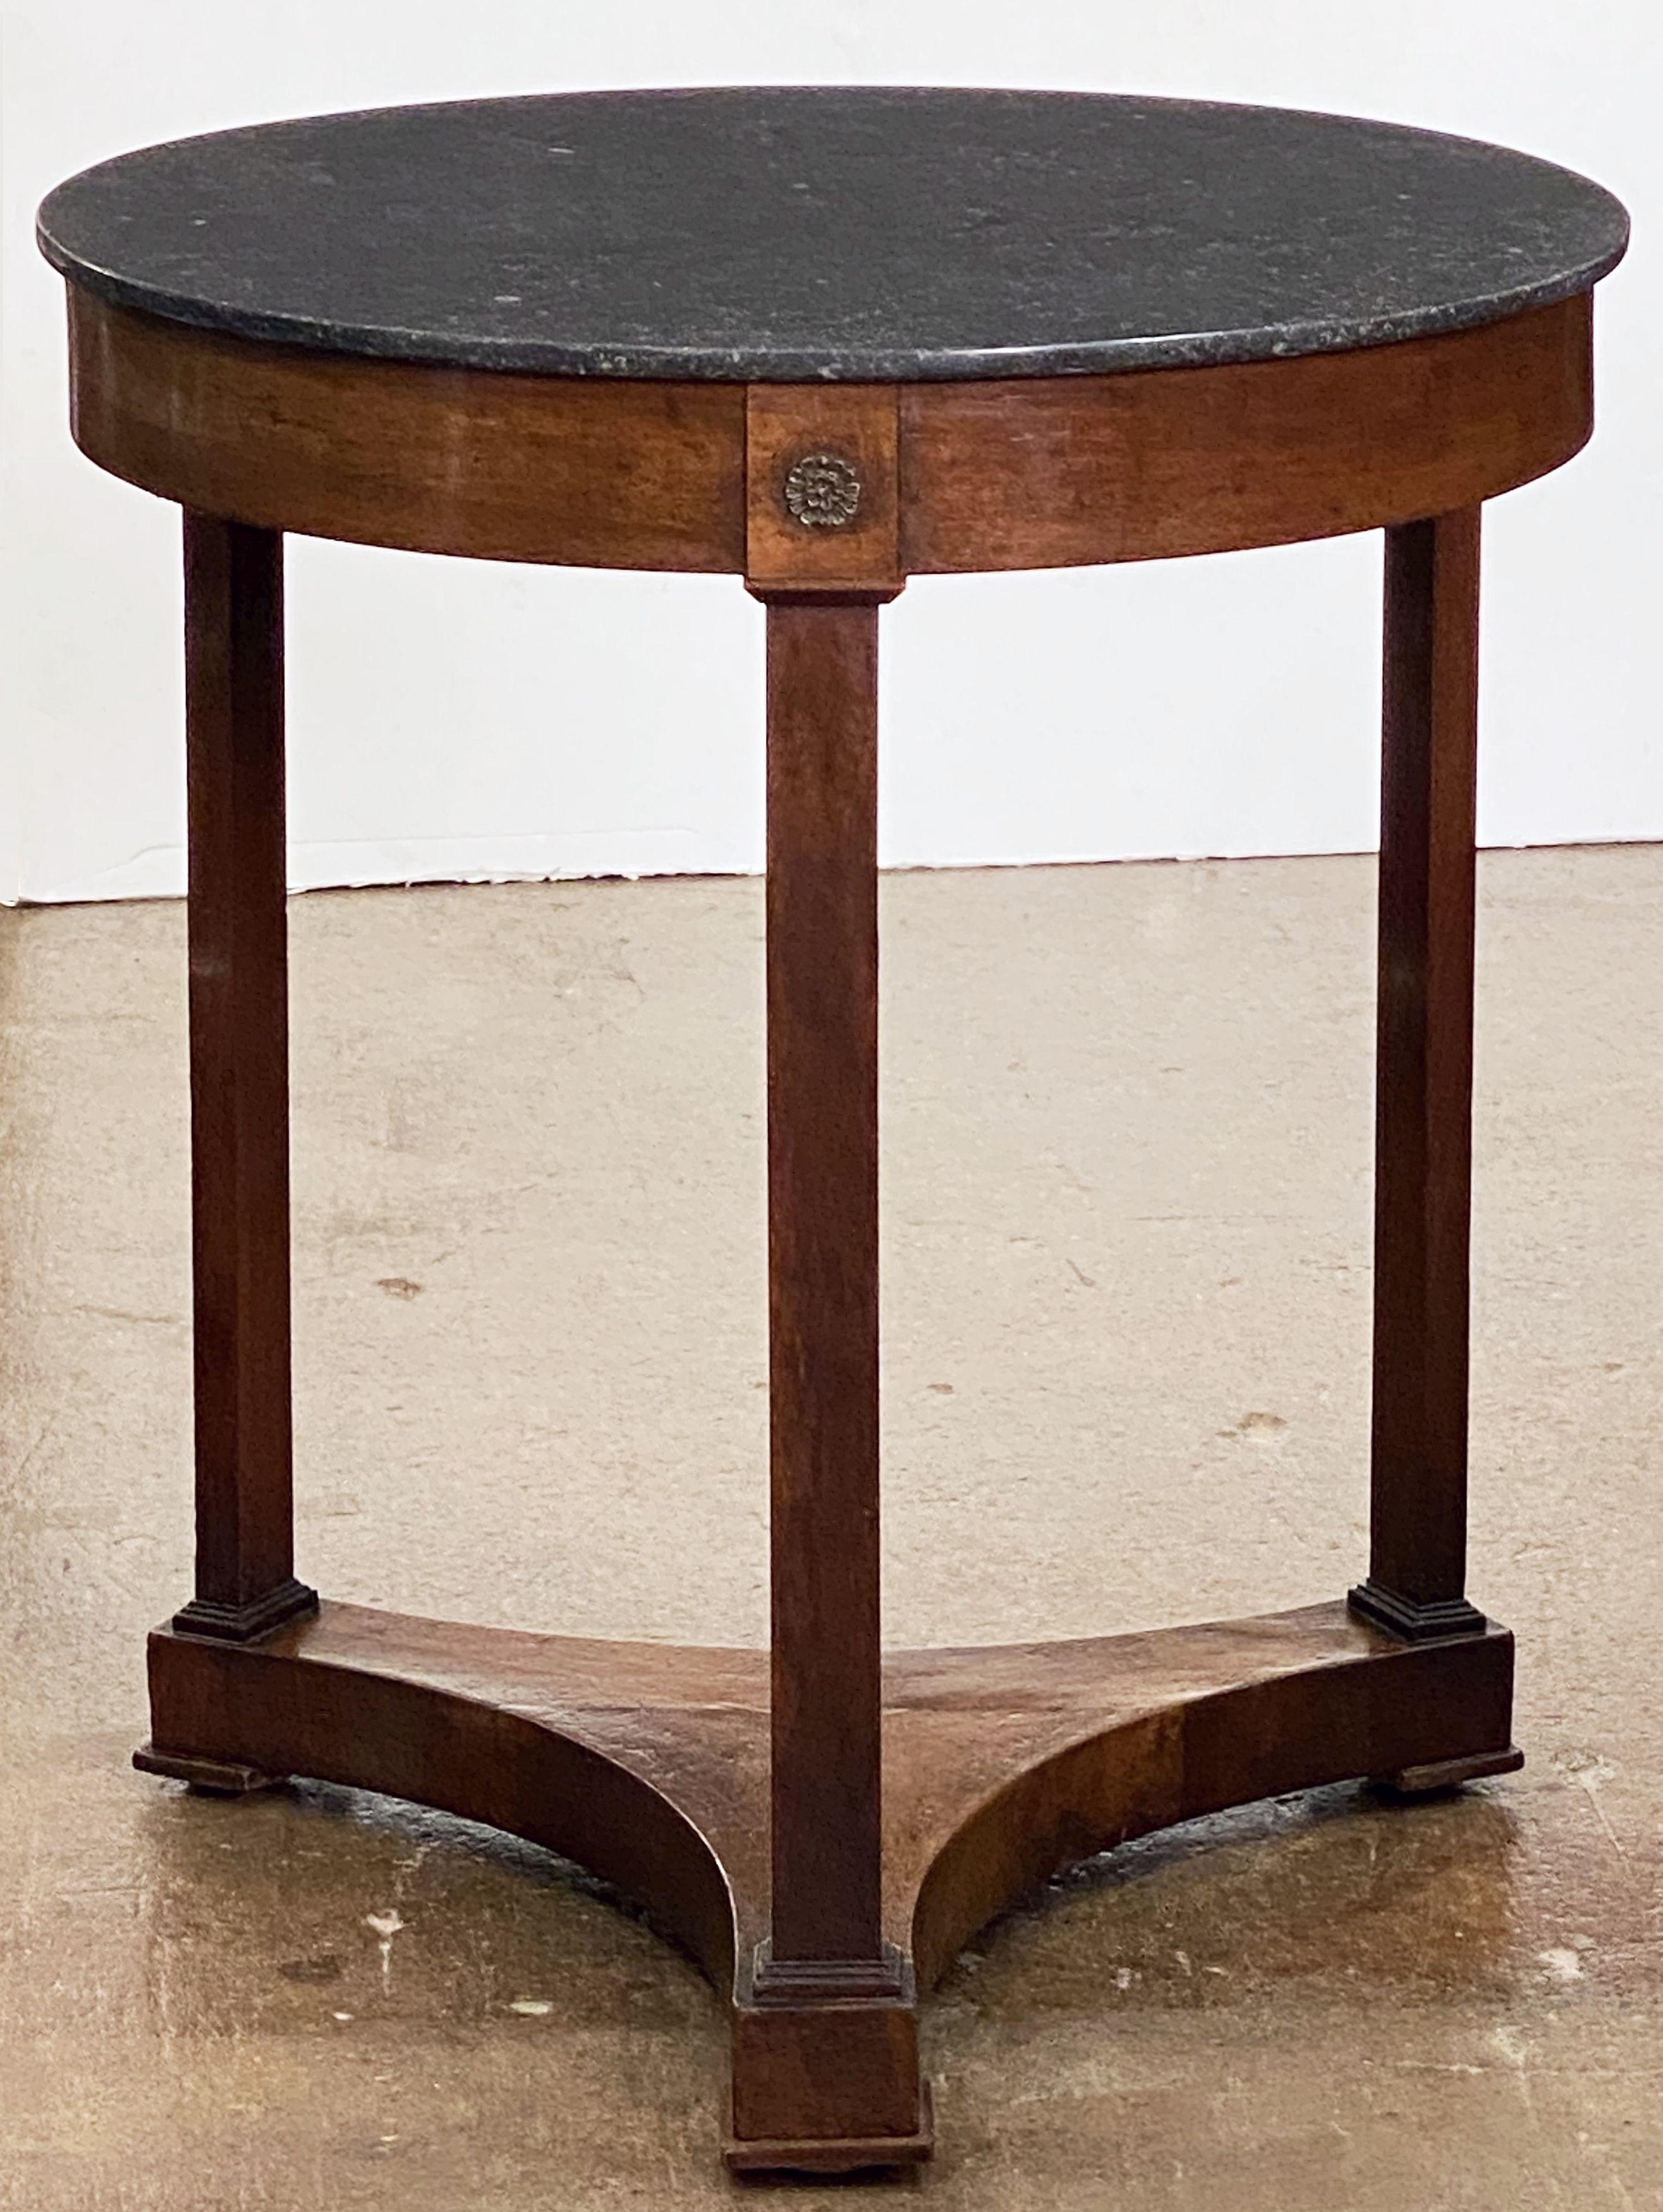 A handsome French round occasional table or guéridon in the Empire style, featuring a circular top of black marble set upon a tri-form support of mahogany with brass ormolu decorations, and resting on block feet. 

Marble top is original to the